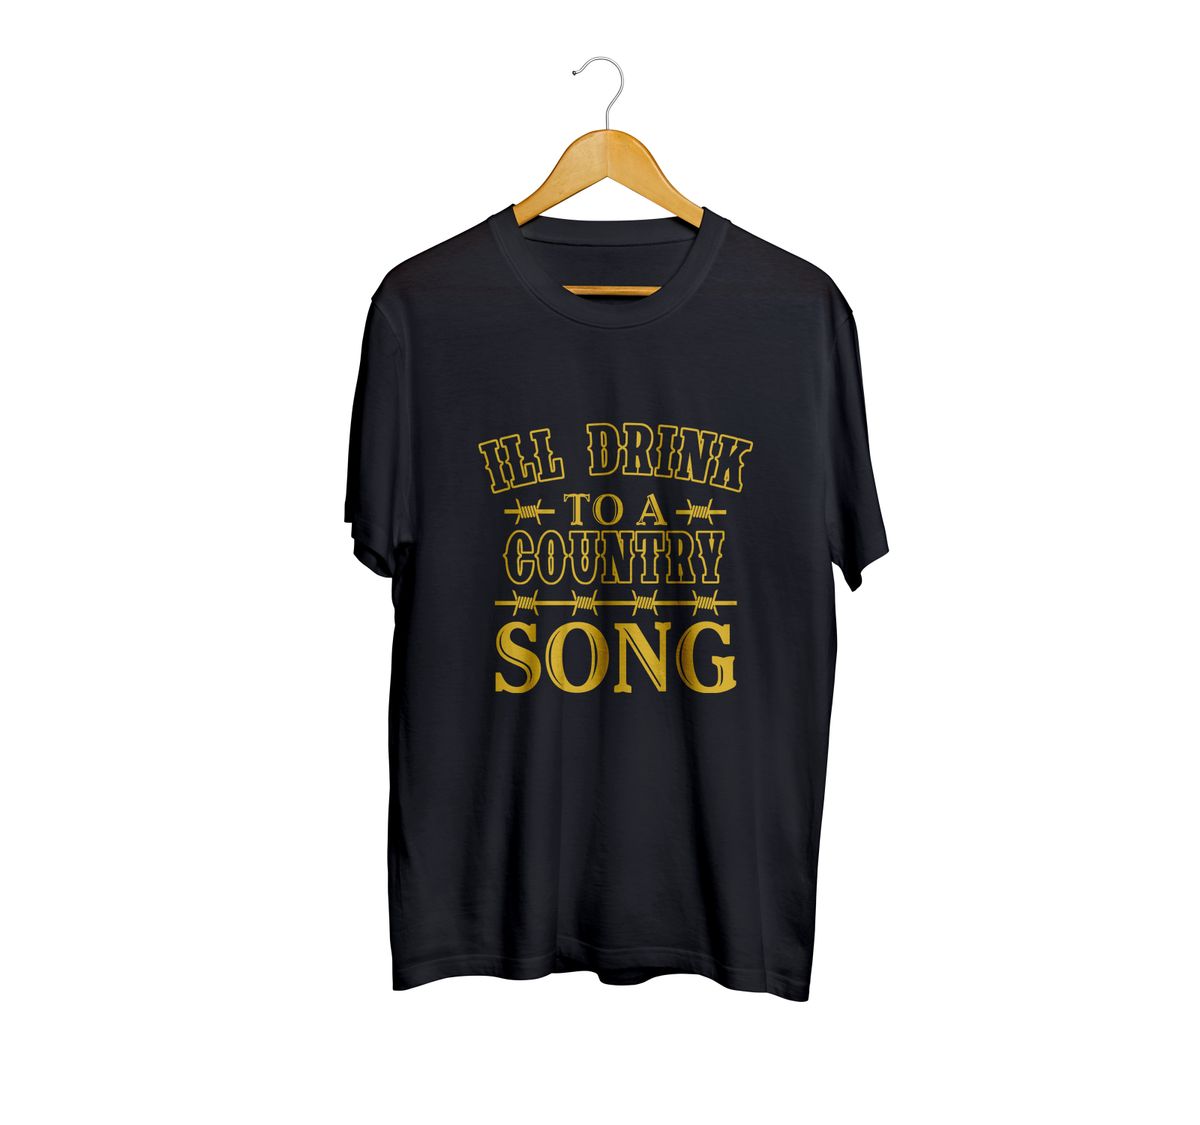 Country Fans Club Black Song T-Shirt image 1